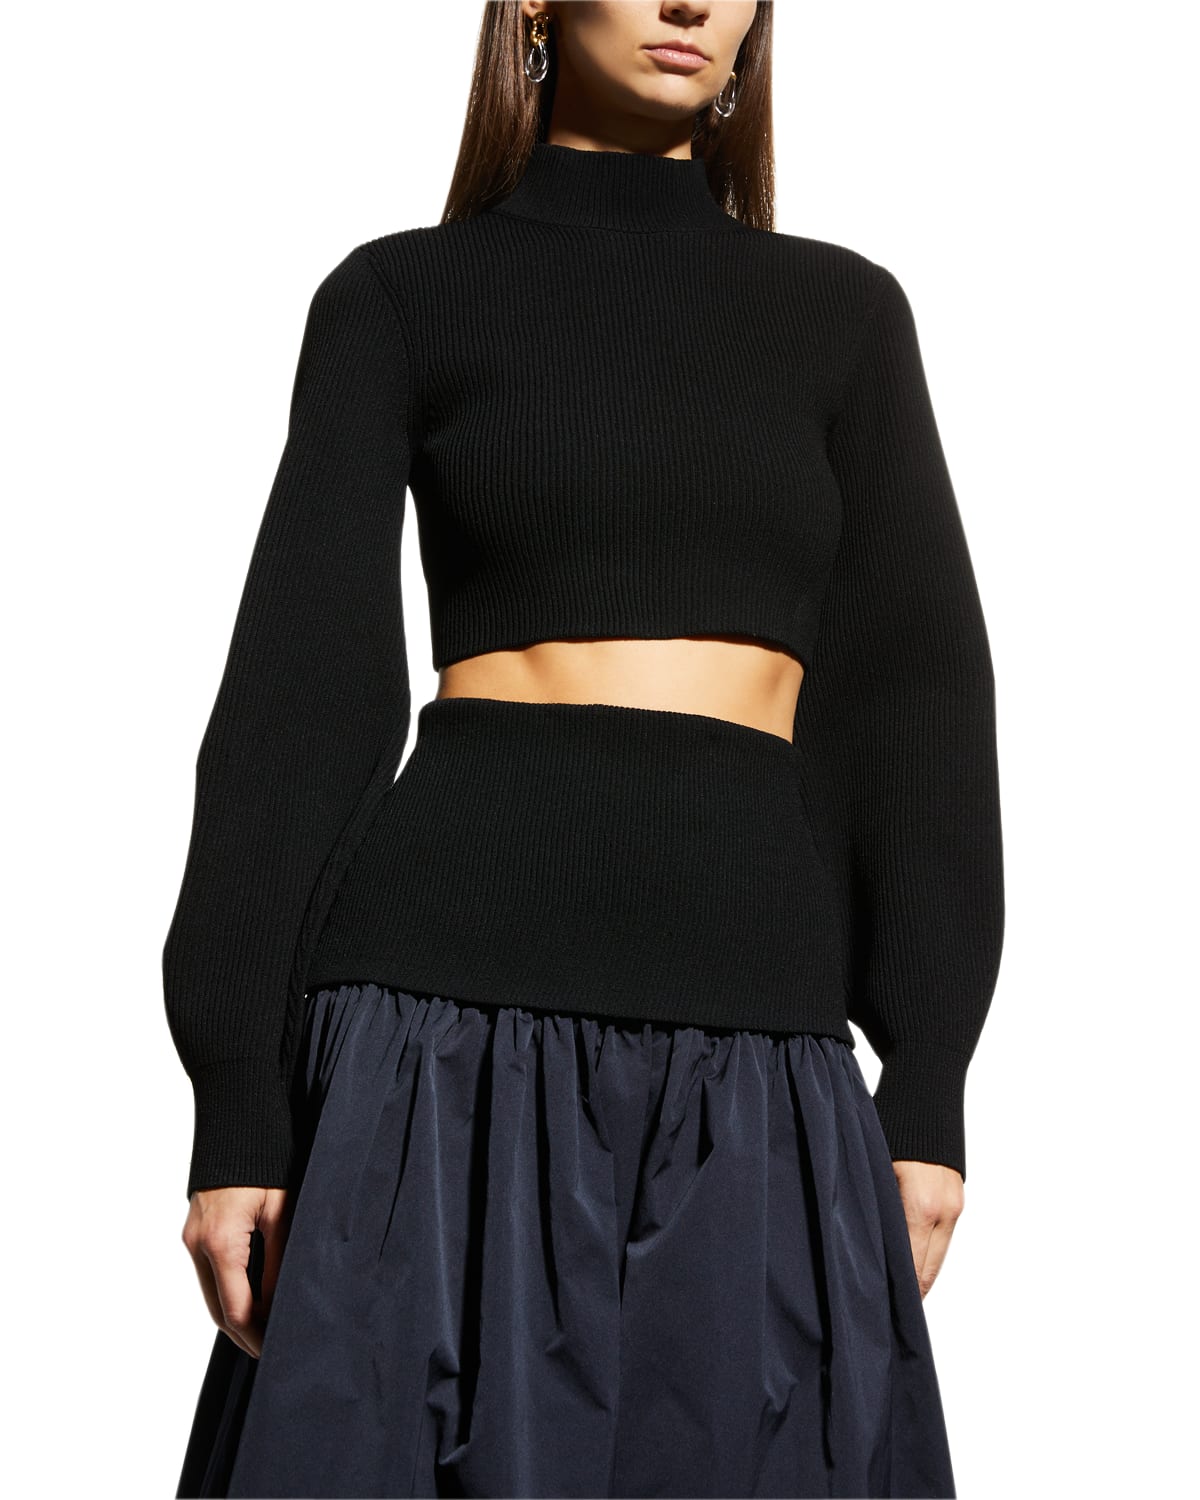 A.L.C. Sydney Ribbed Turtleneck Puffed-Sleeve Sweater